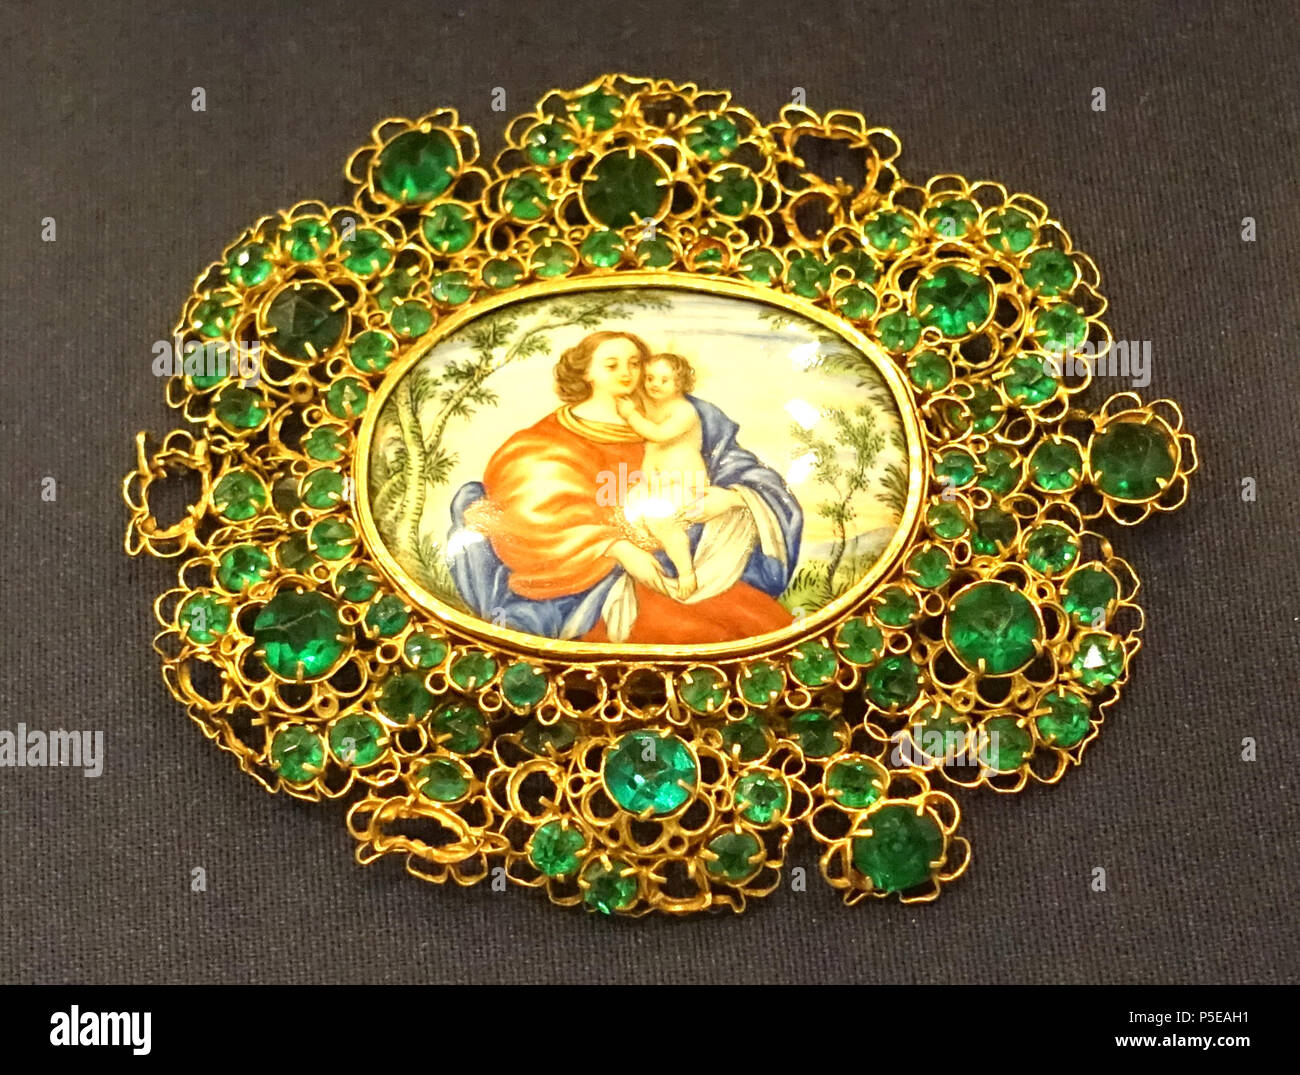 N/A. English: Exhibit in the Museo Nacional de Artes Decorativas, Madrid, Spain. This work is in the  because the artist died more than 100 years ago. Photography was permitted in the museum without restriction. 10 October 2014, 06:08:39. Daderot 241 Brooch with Virgin and Child, 18th century AD, gold filigree, emeralds, enameled plaque - Museo Nacional de Artes Decorativas - Madrid, Spain - DSC08024 Stock Photo